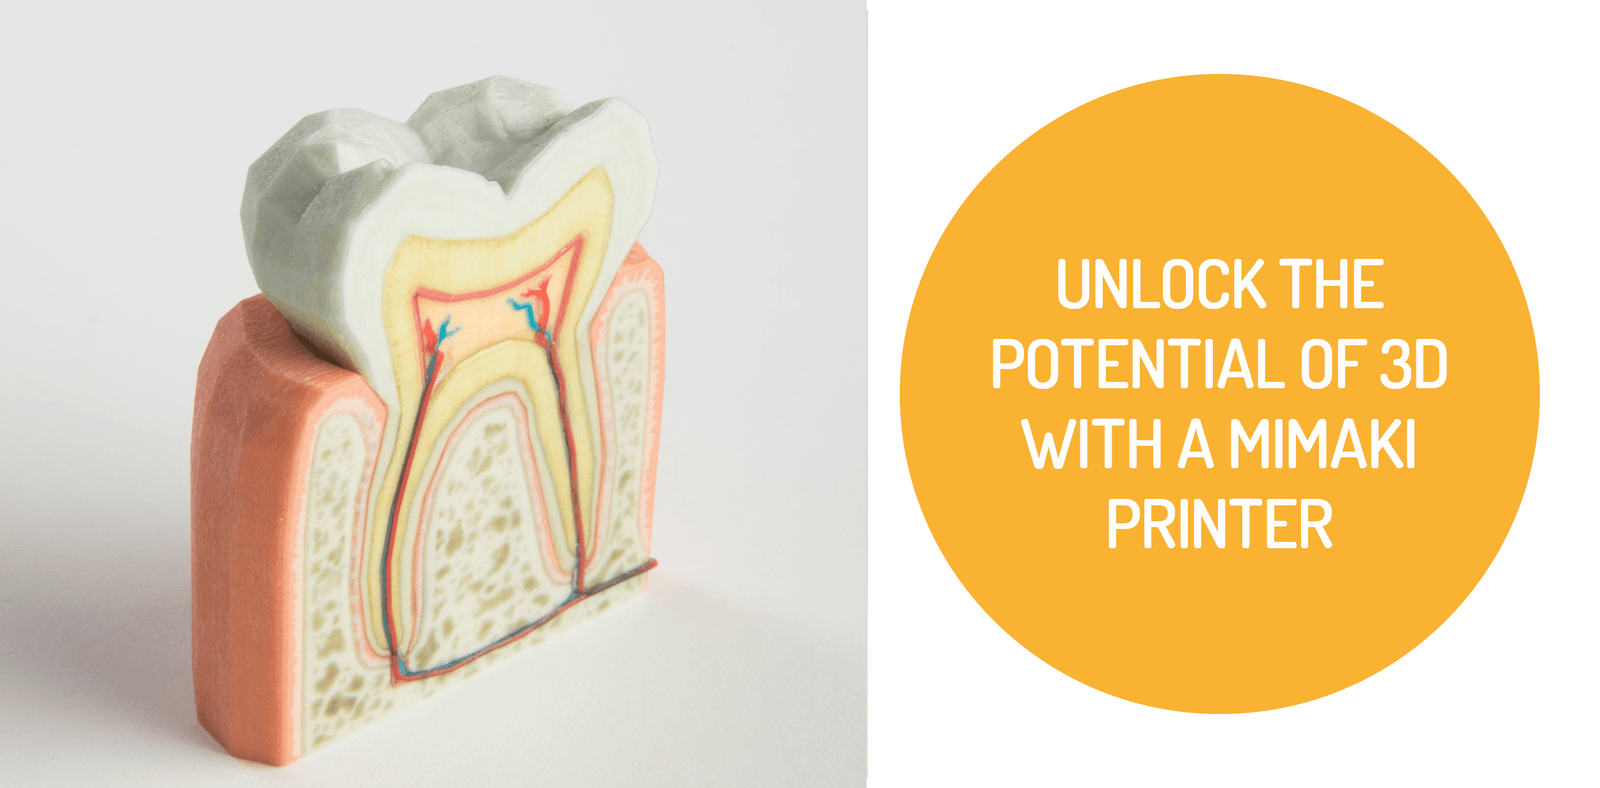 Unlock the Potential of 3D with a Mimaki Printer